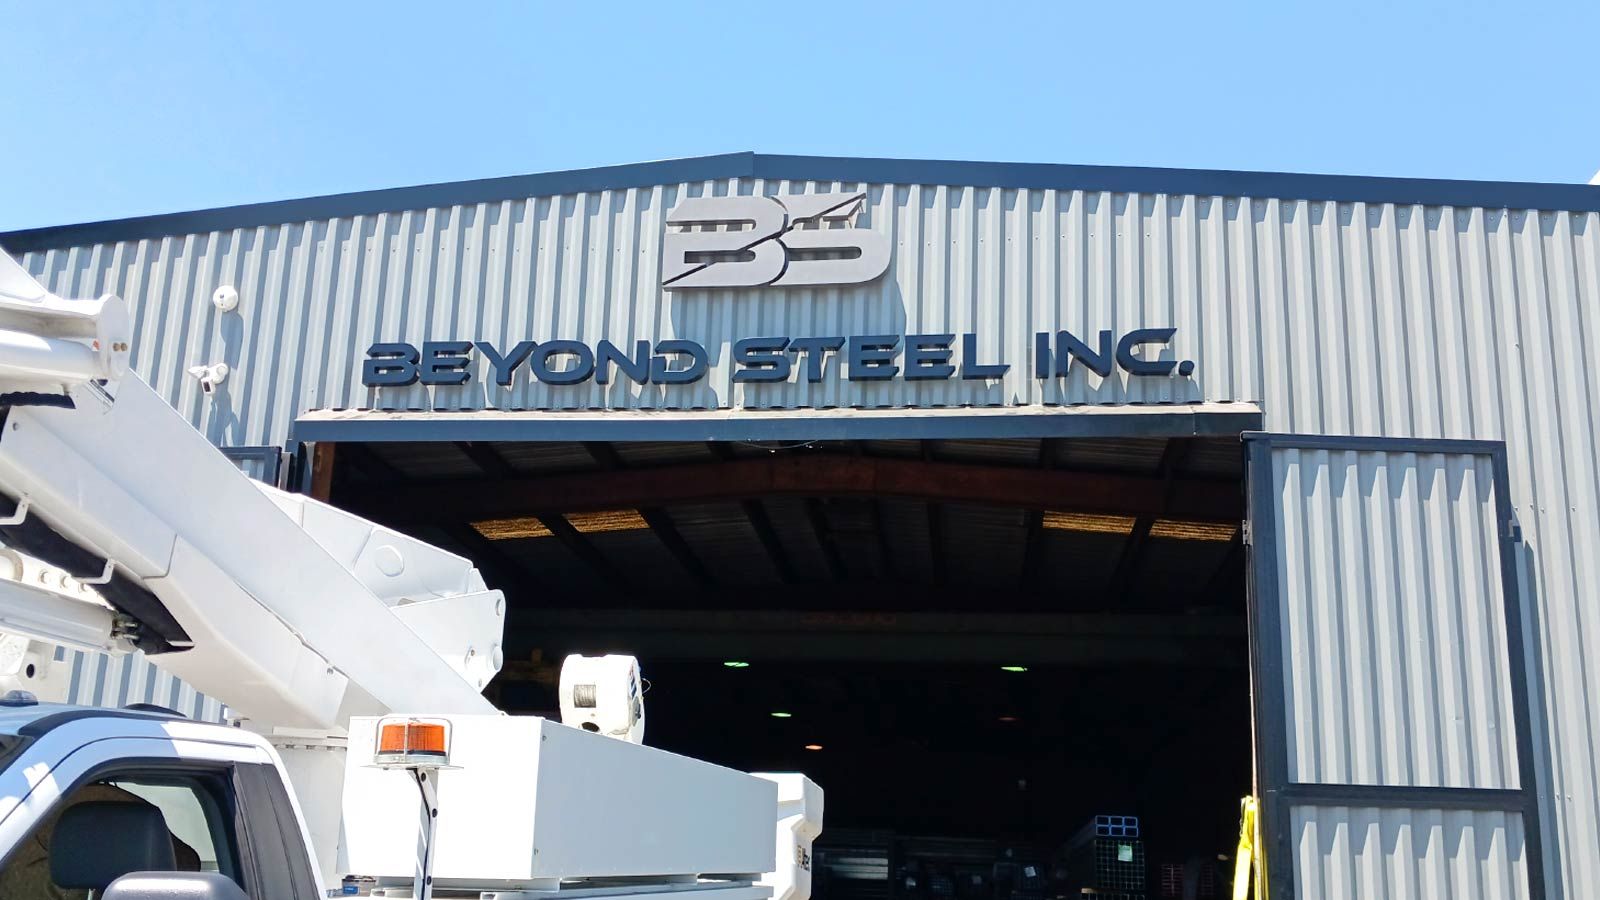 Beyond Steel Inc. outdoor led sign